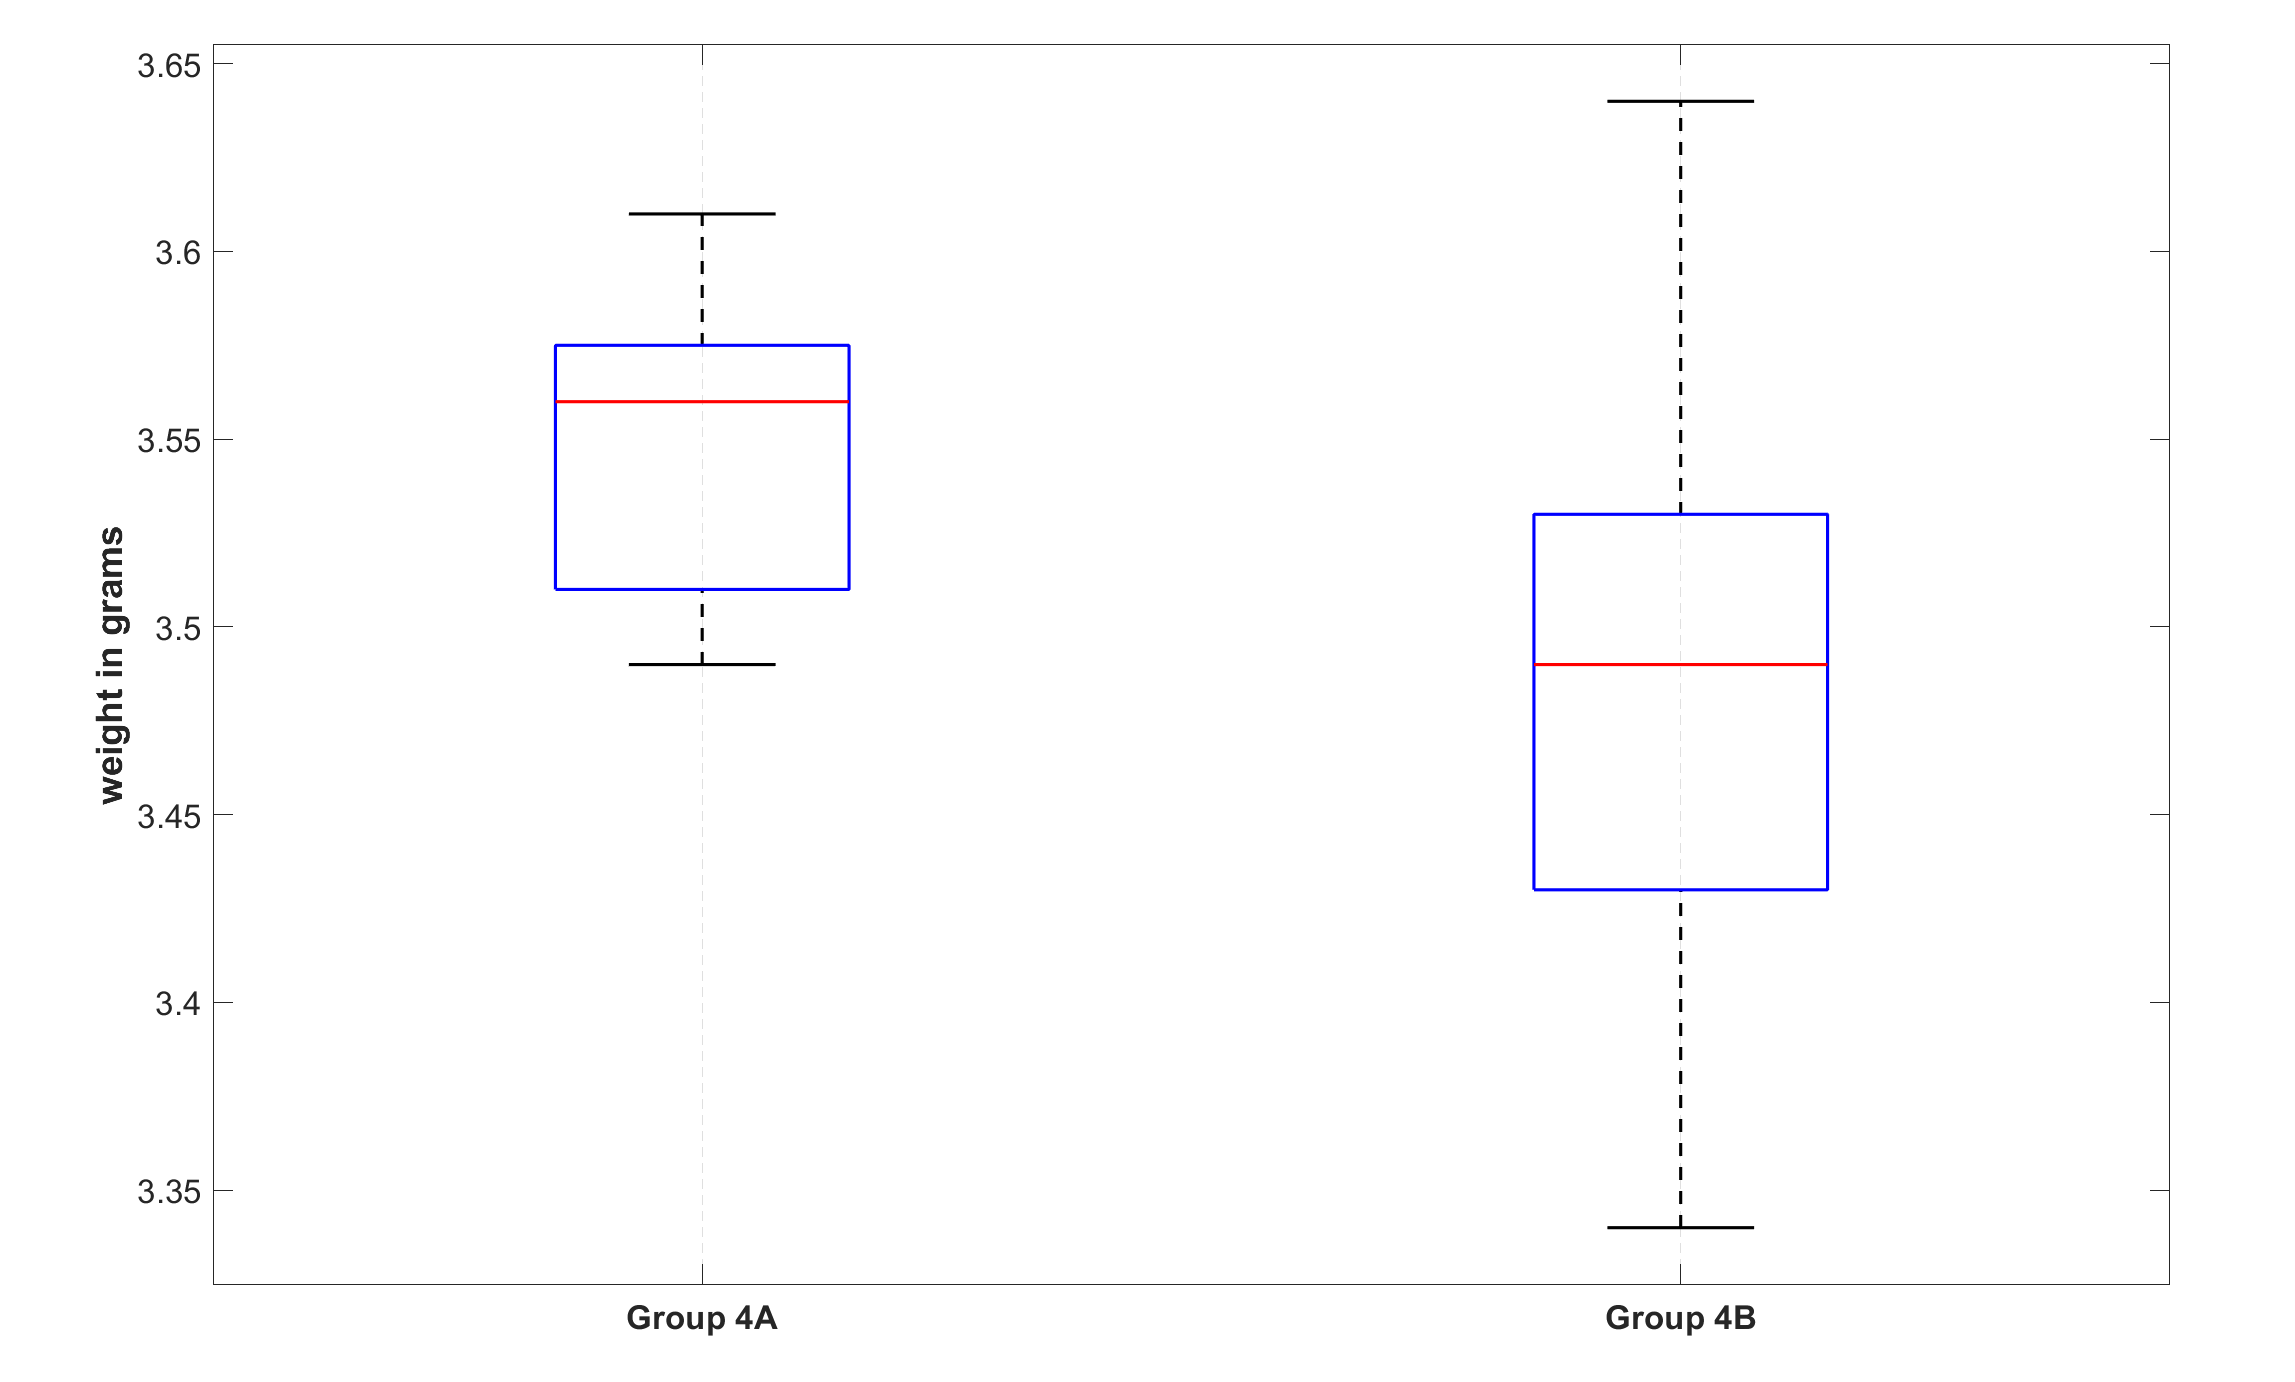 Figure 2: Box plots of Groups 4A and 4B